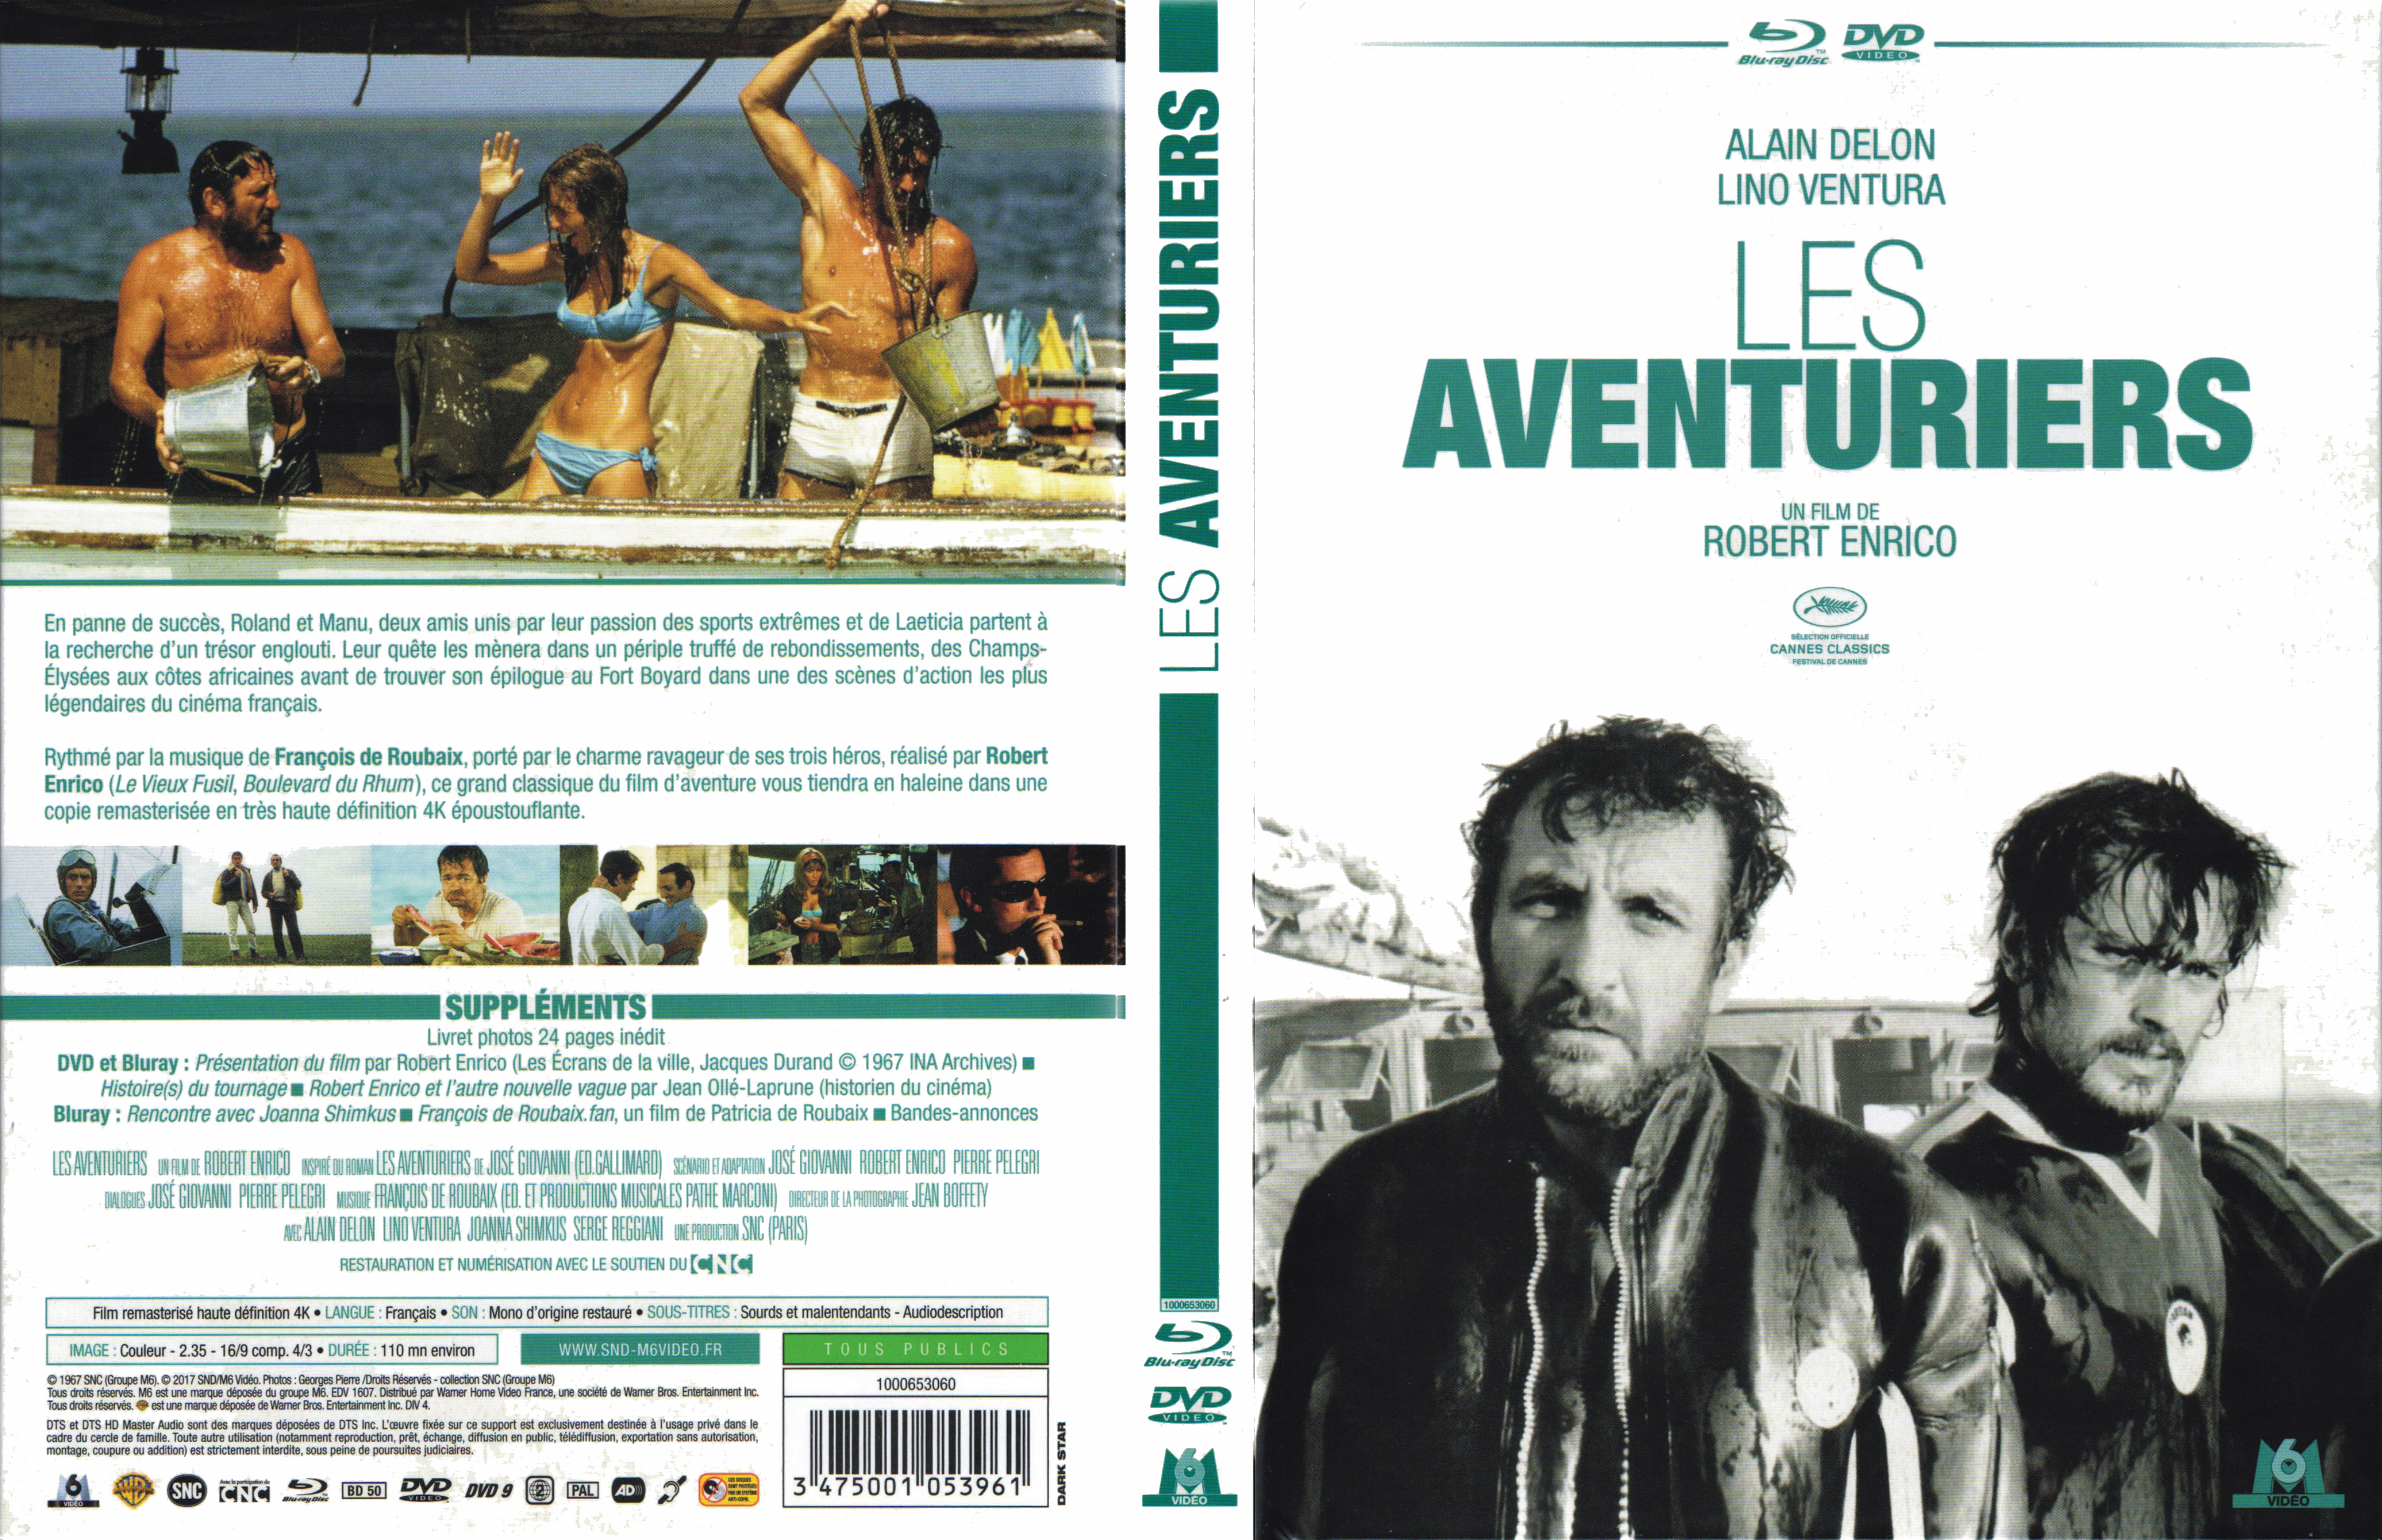 Jaquette DVD Les aventuriers (BLU-RAY)